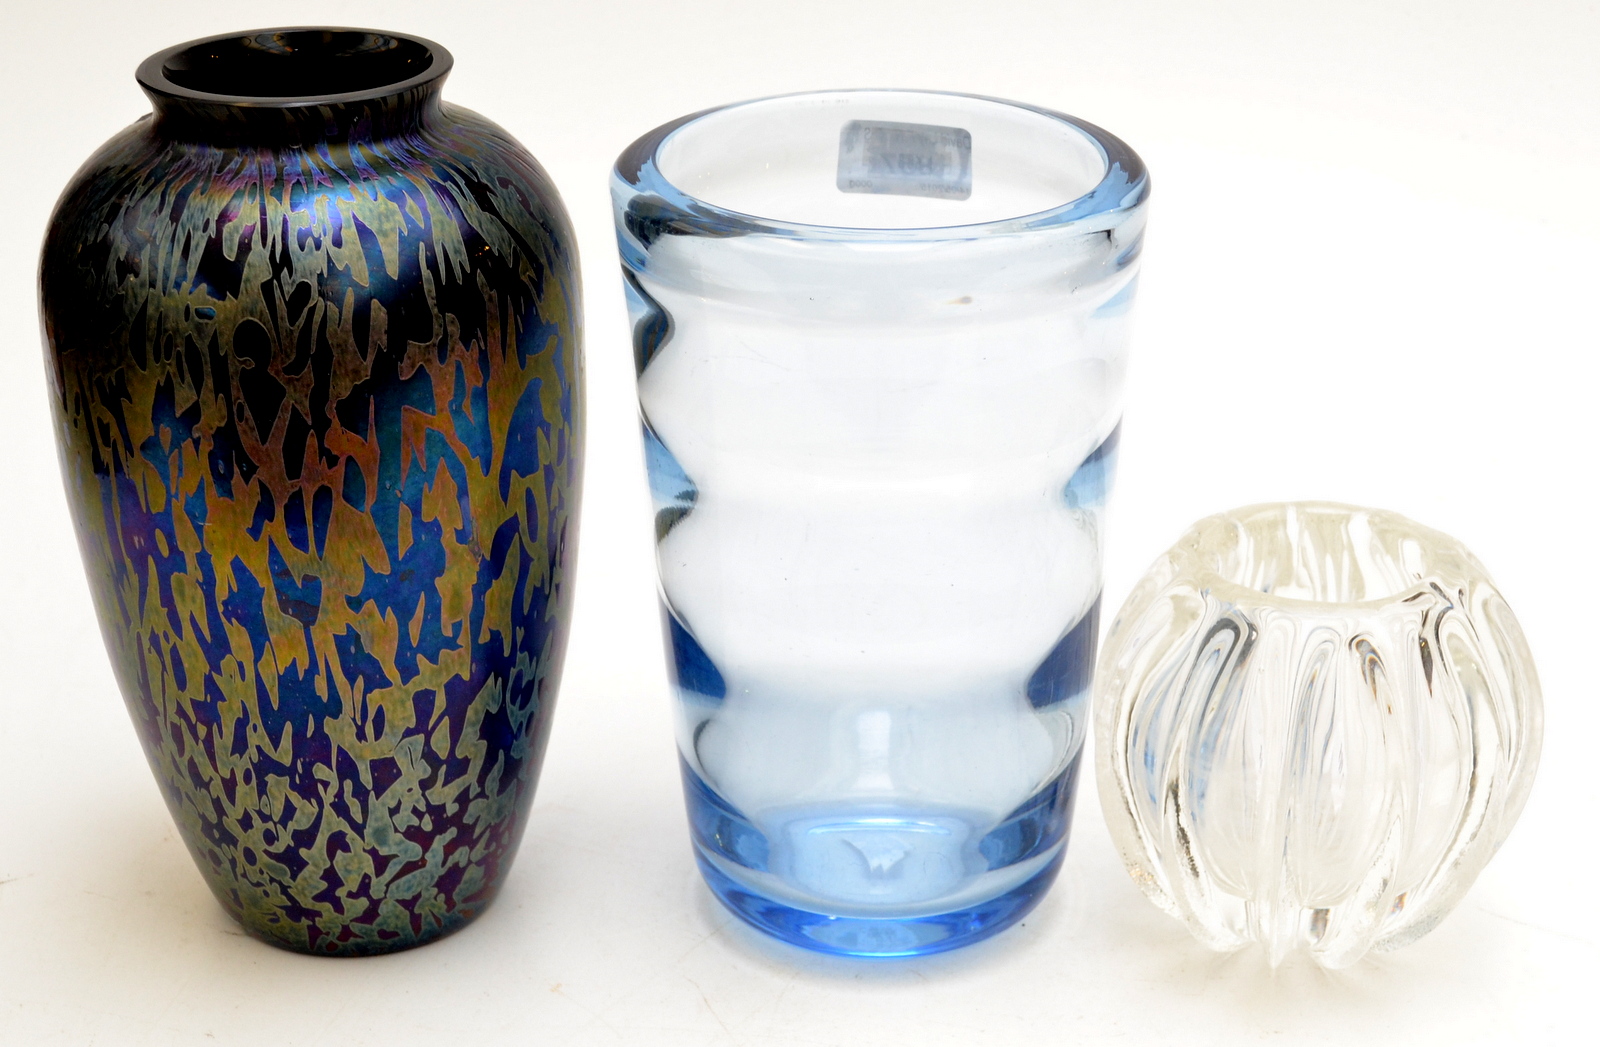 A Whitefriars glass vase, a Brierley studio glass vase and one other glass vase.